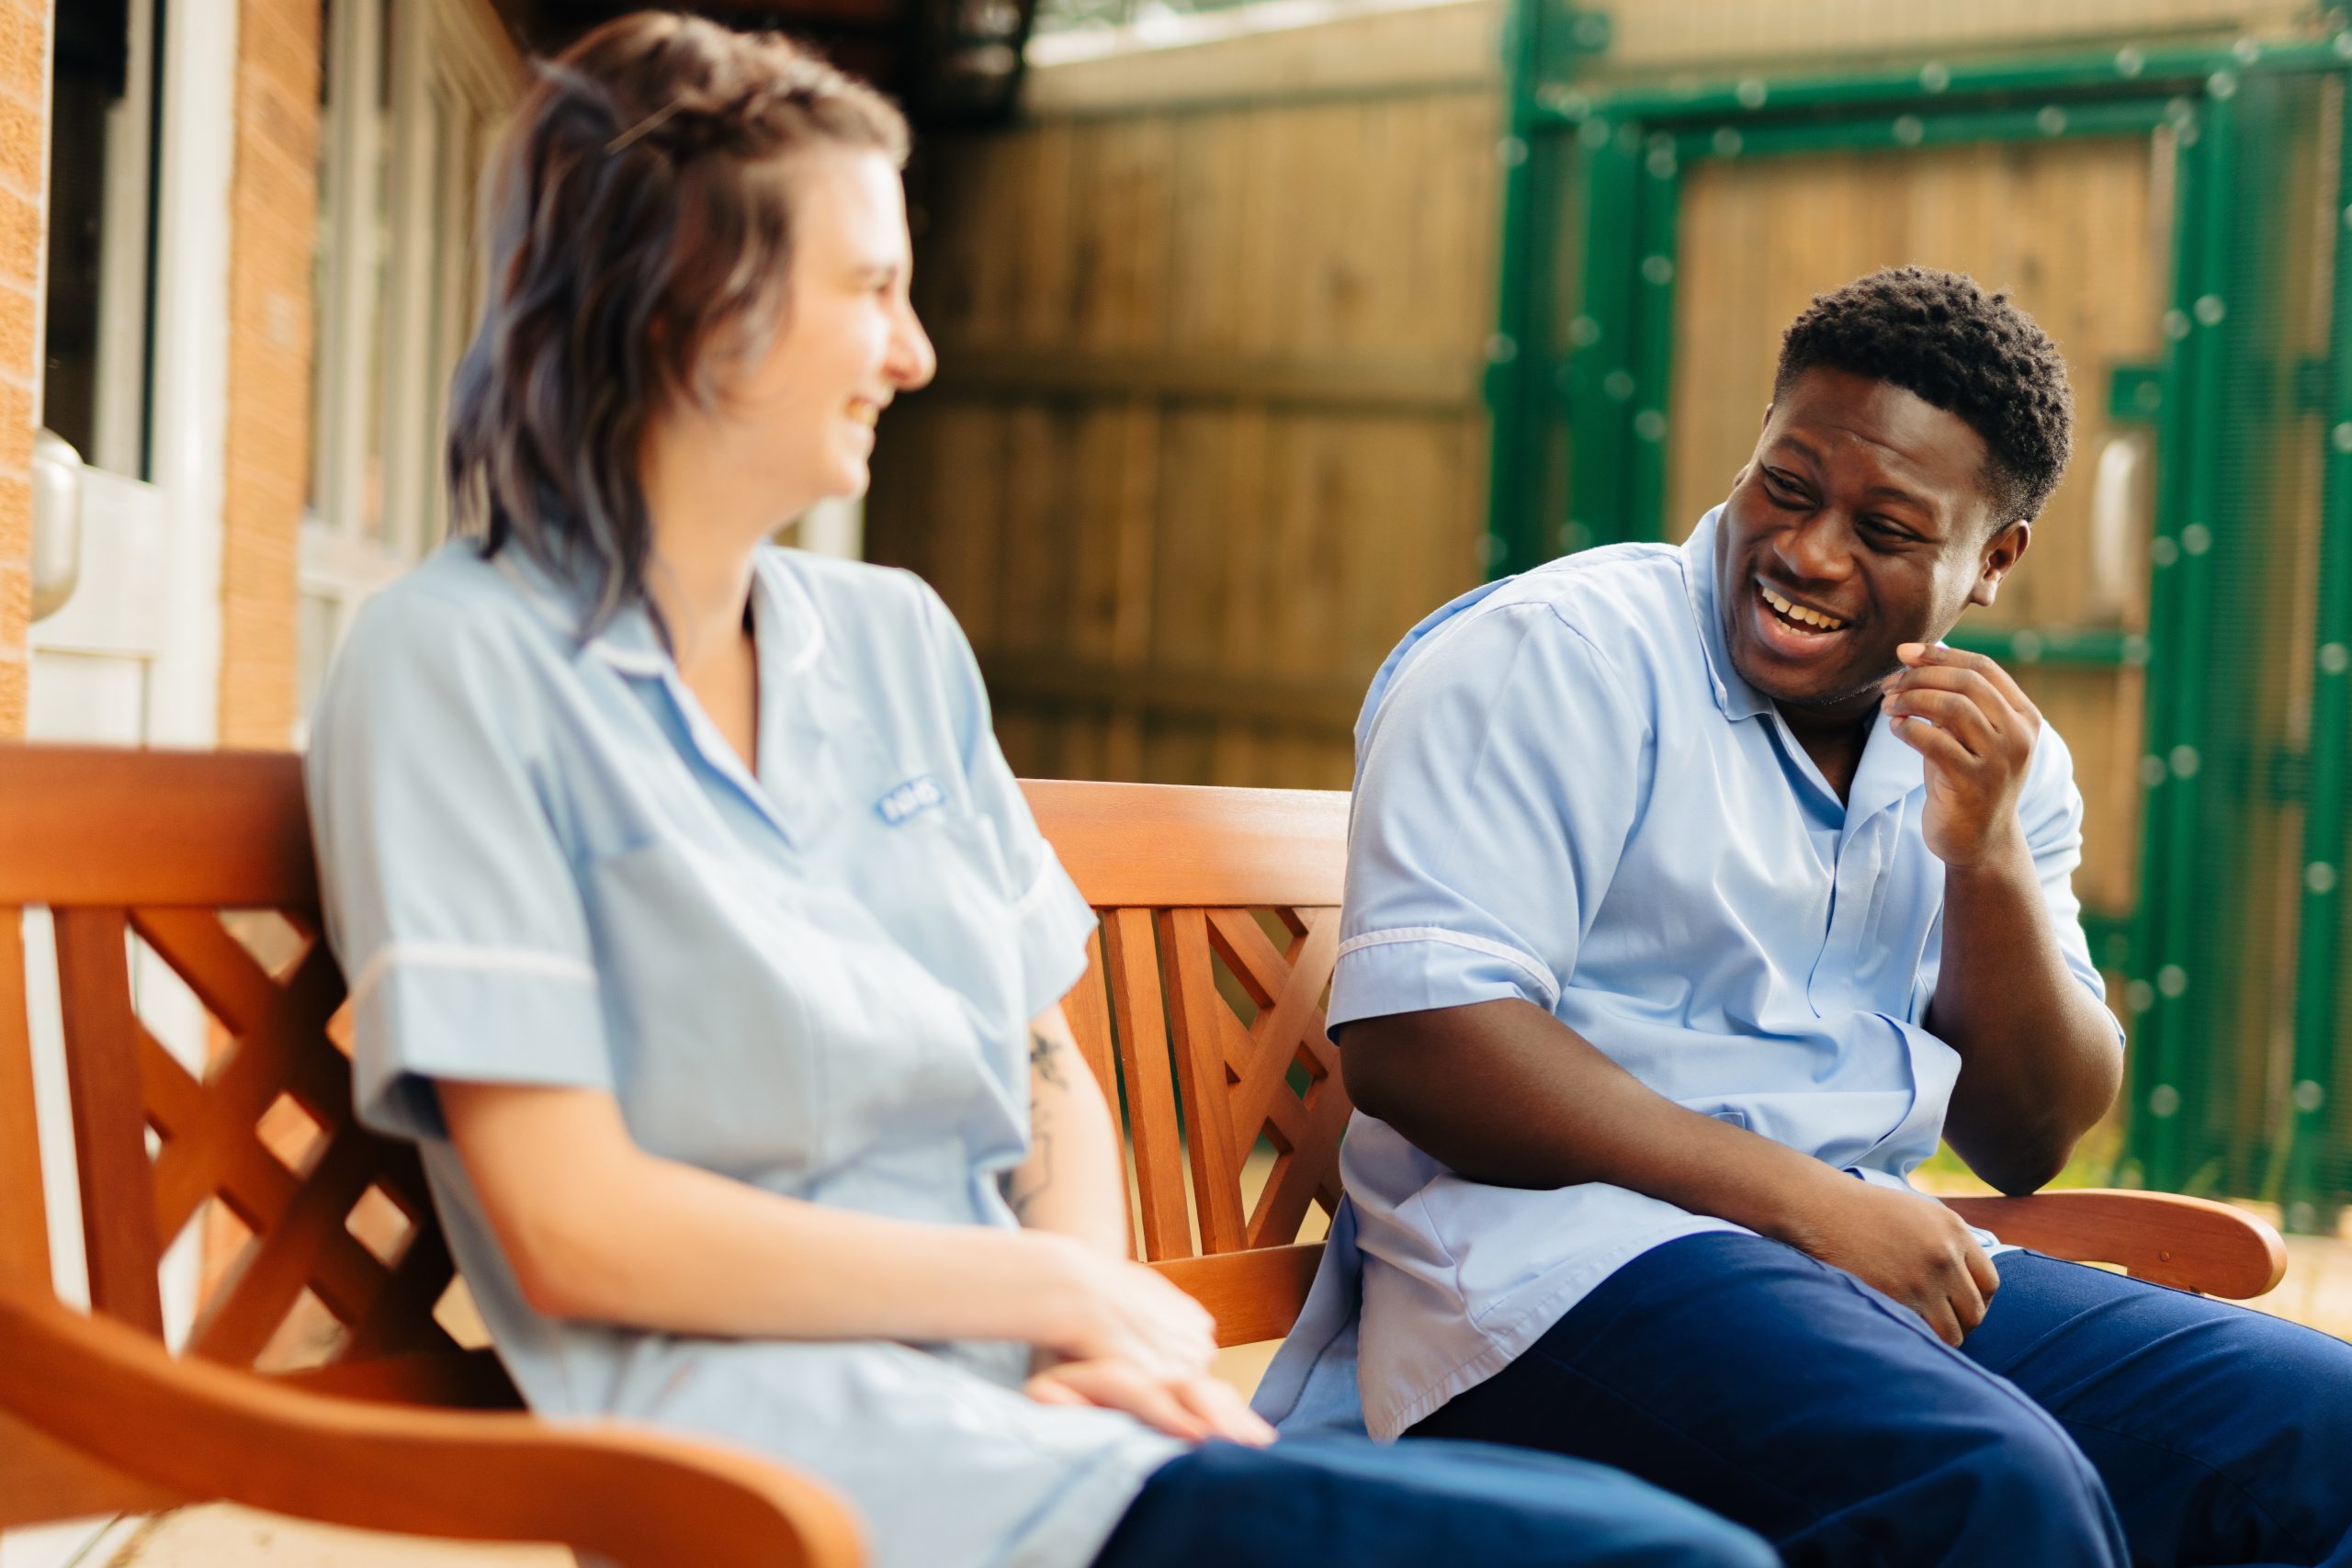 image of two colleagues sat on a bench laughing, both wearing health care uniforms